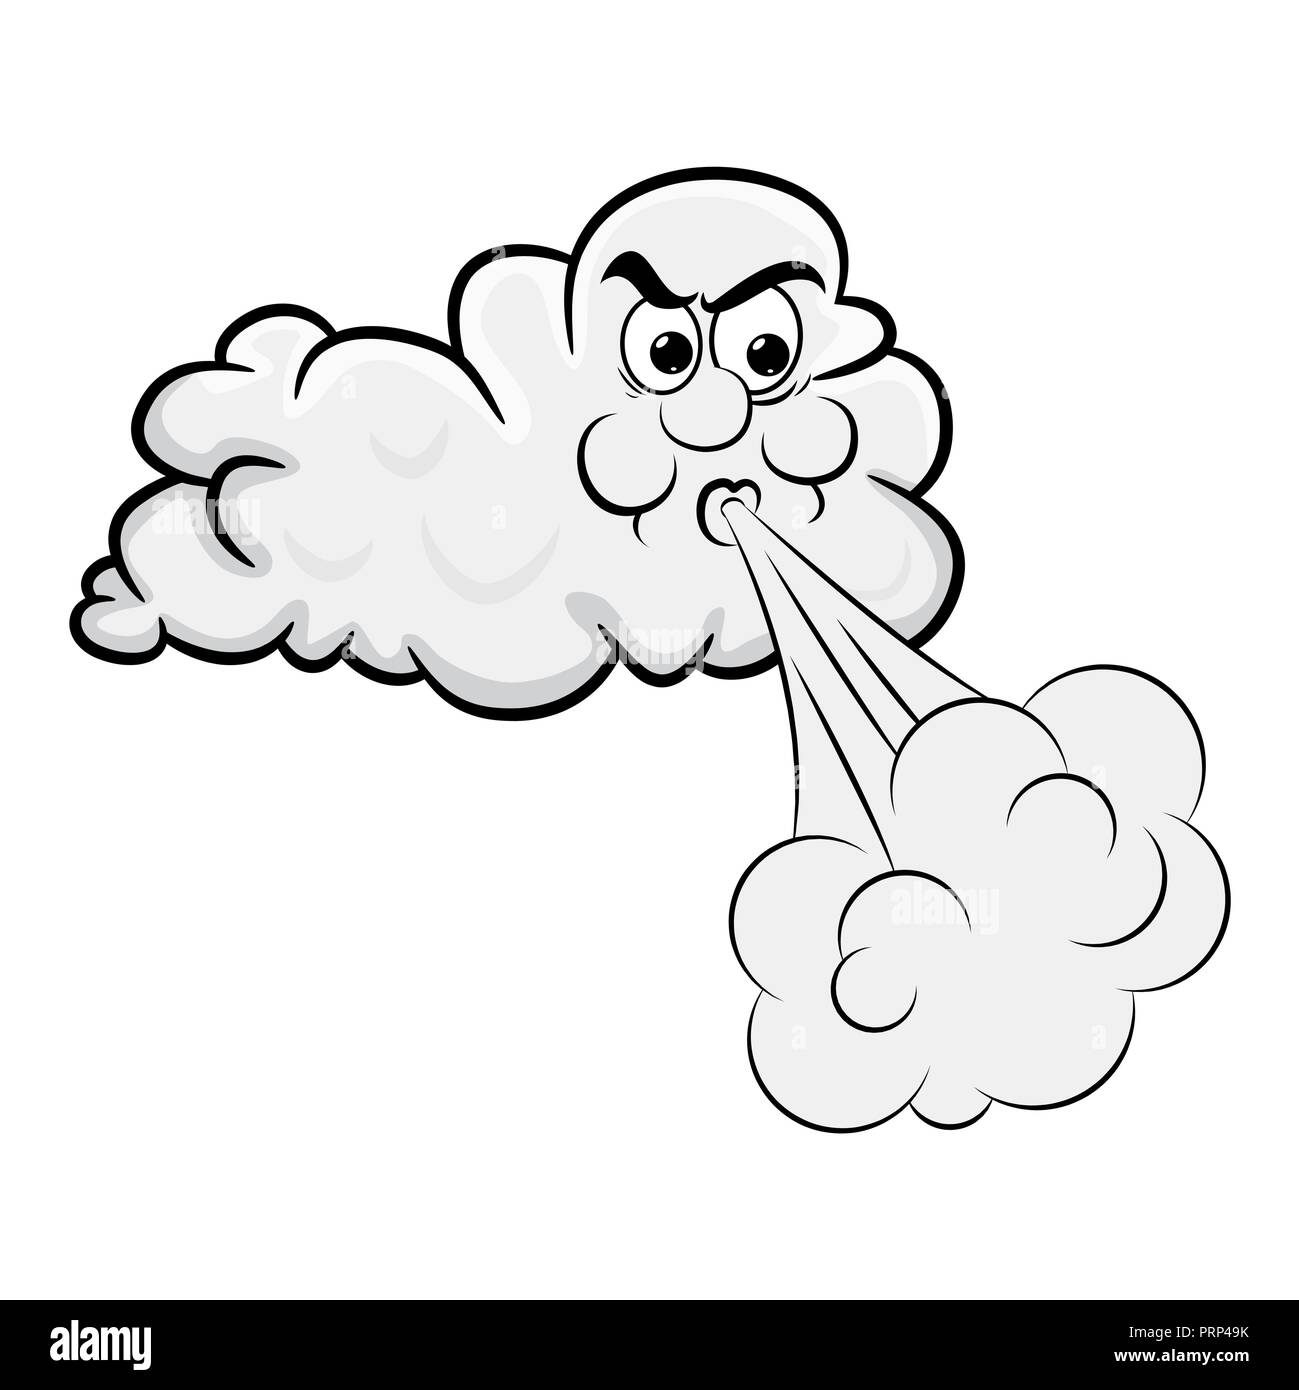 blowing cloud cartoon design isolated on white background Stock Vector